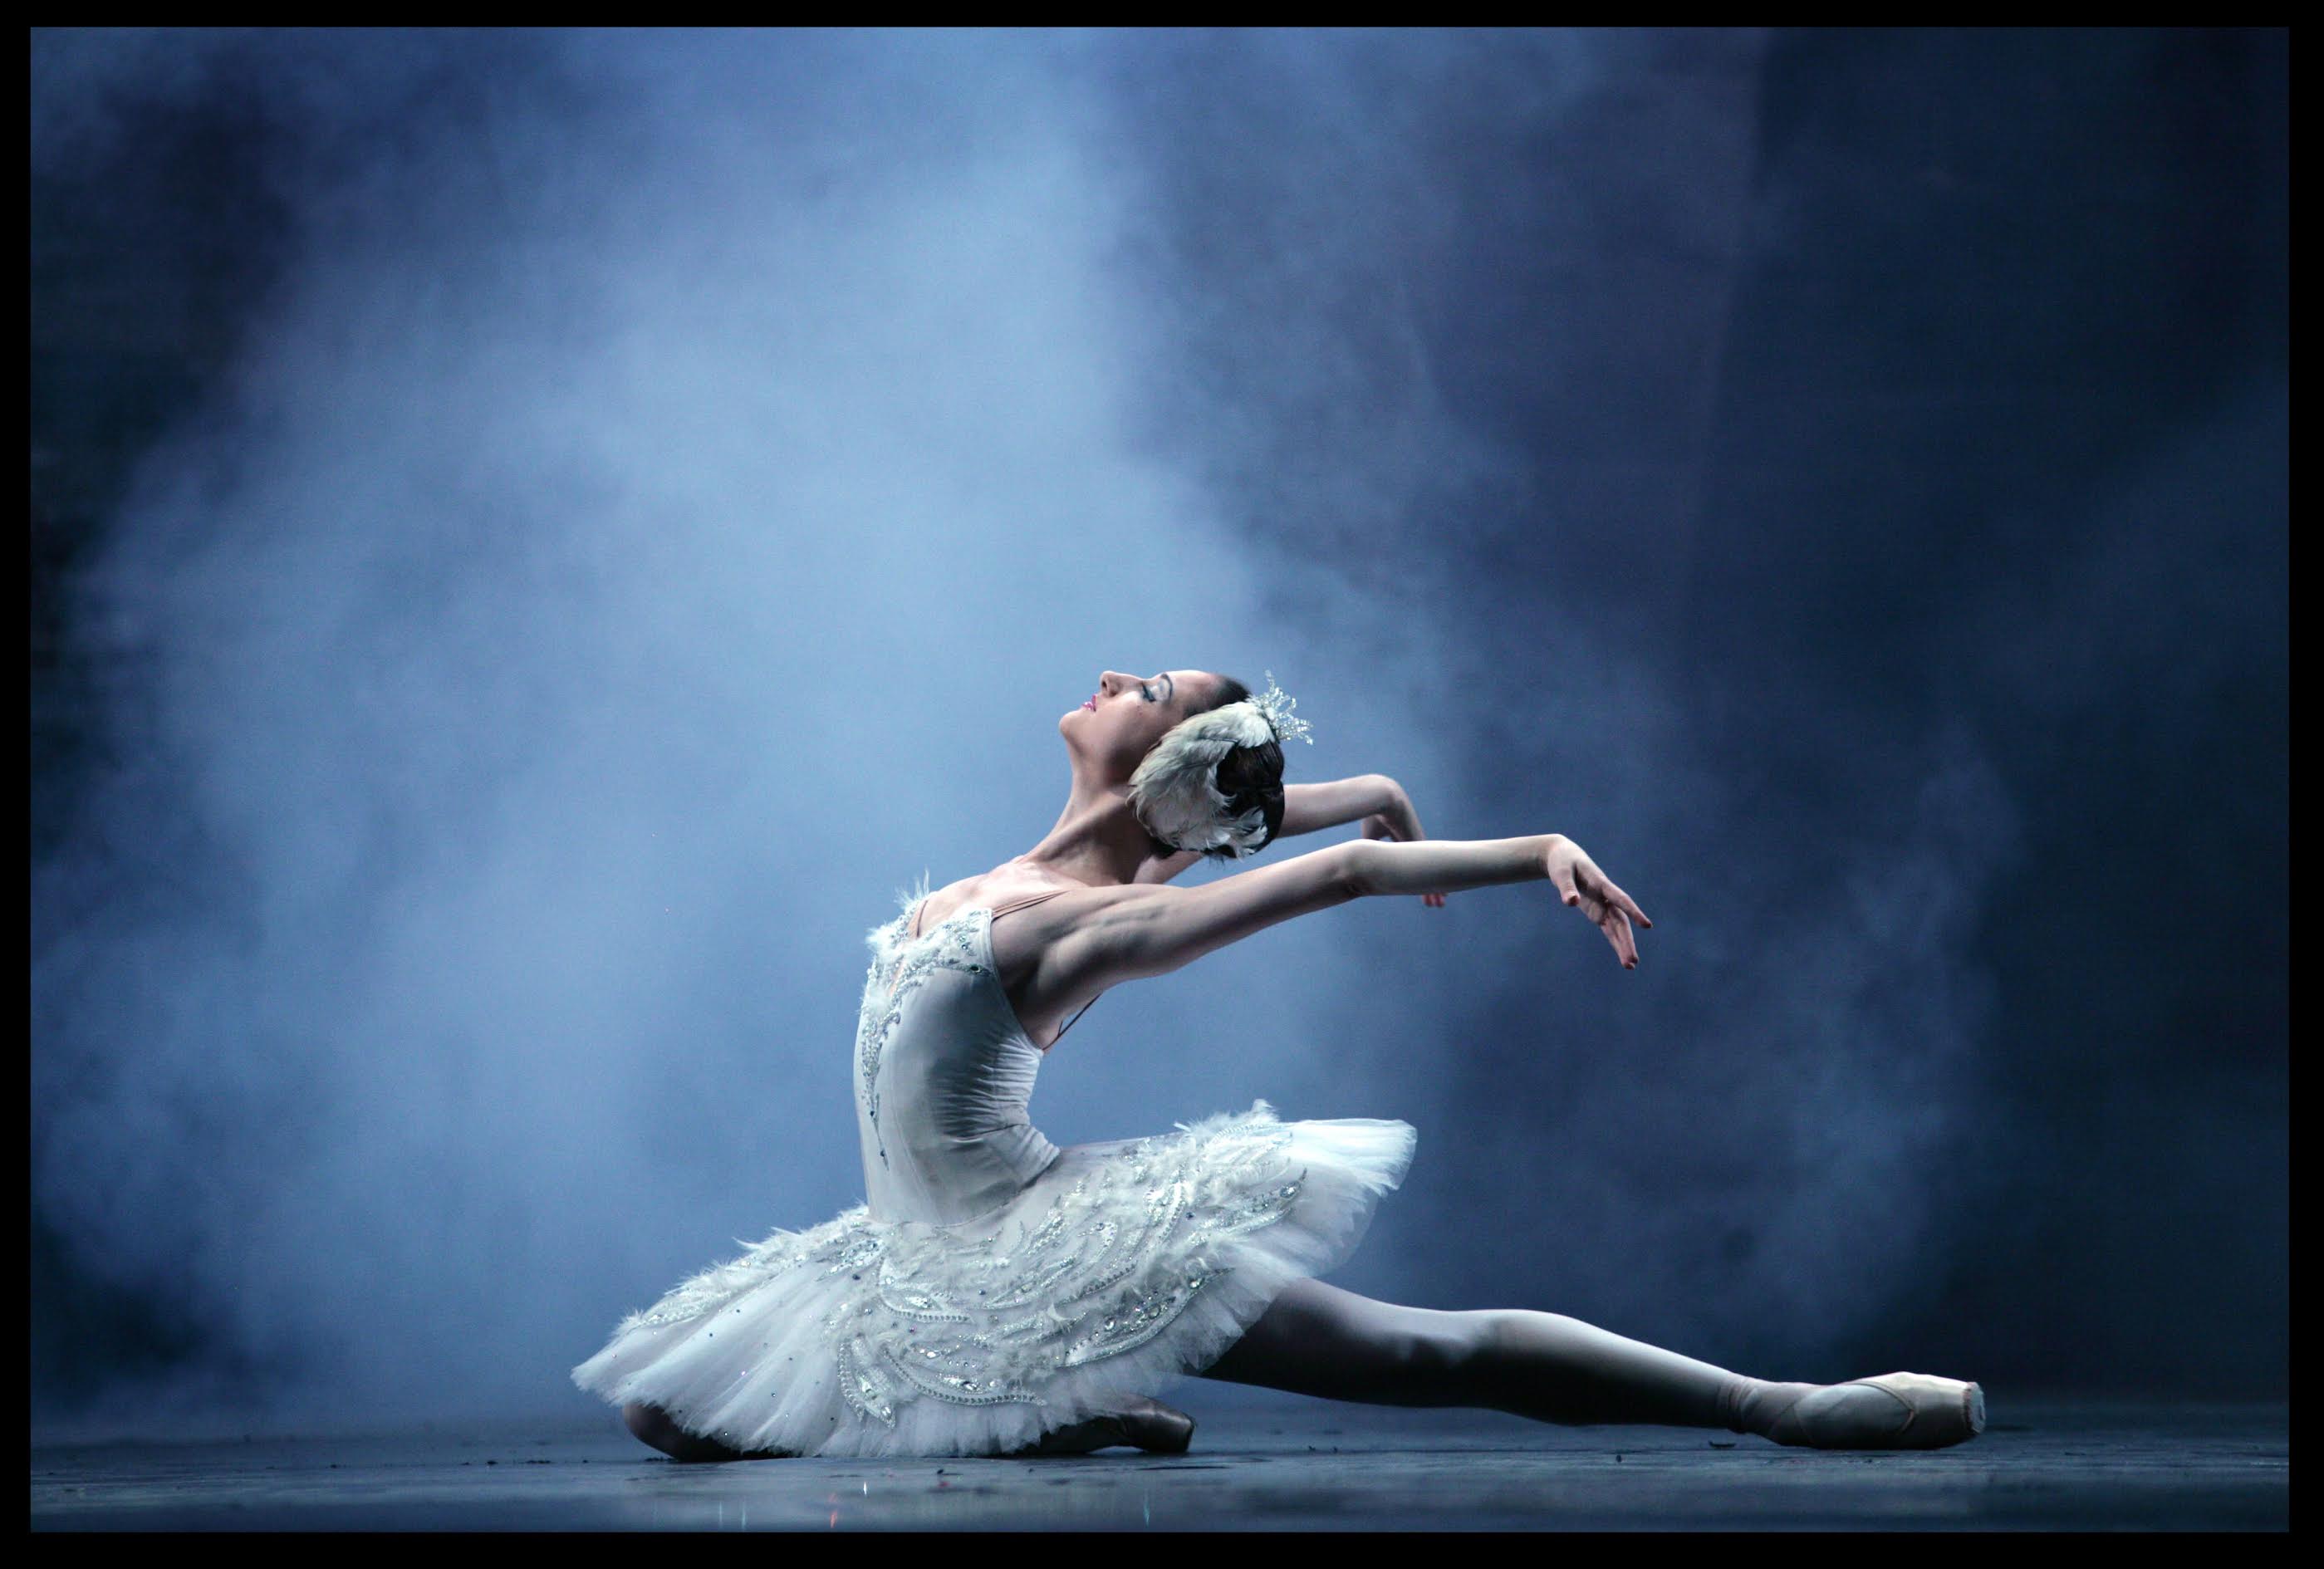 LAC DES CYGNES - THE MOSCOW CITY BALLET